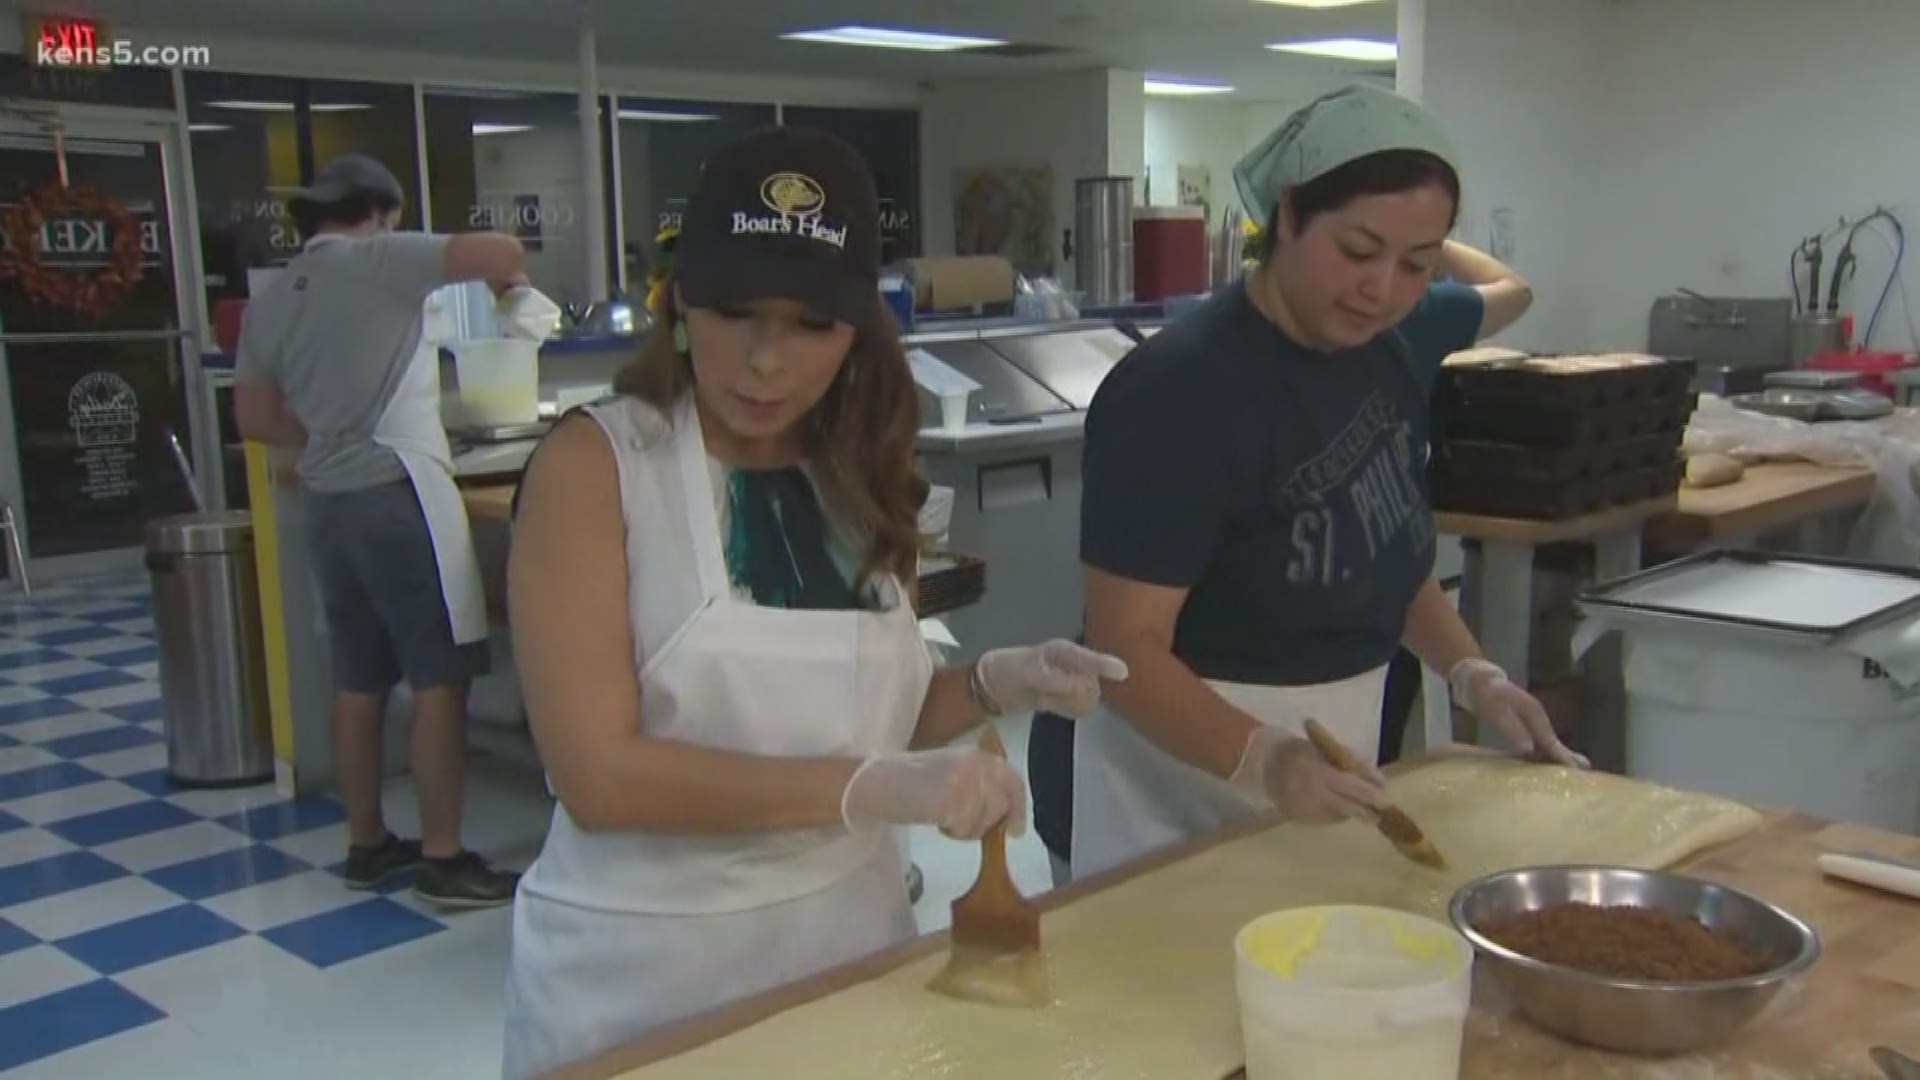 Eyewitness News reporter Audrey Castoreno is live at Broadway Daily Bread with some mouth-watering treats.